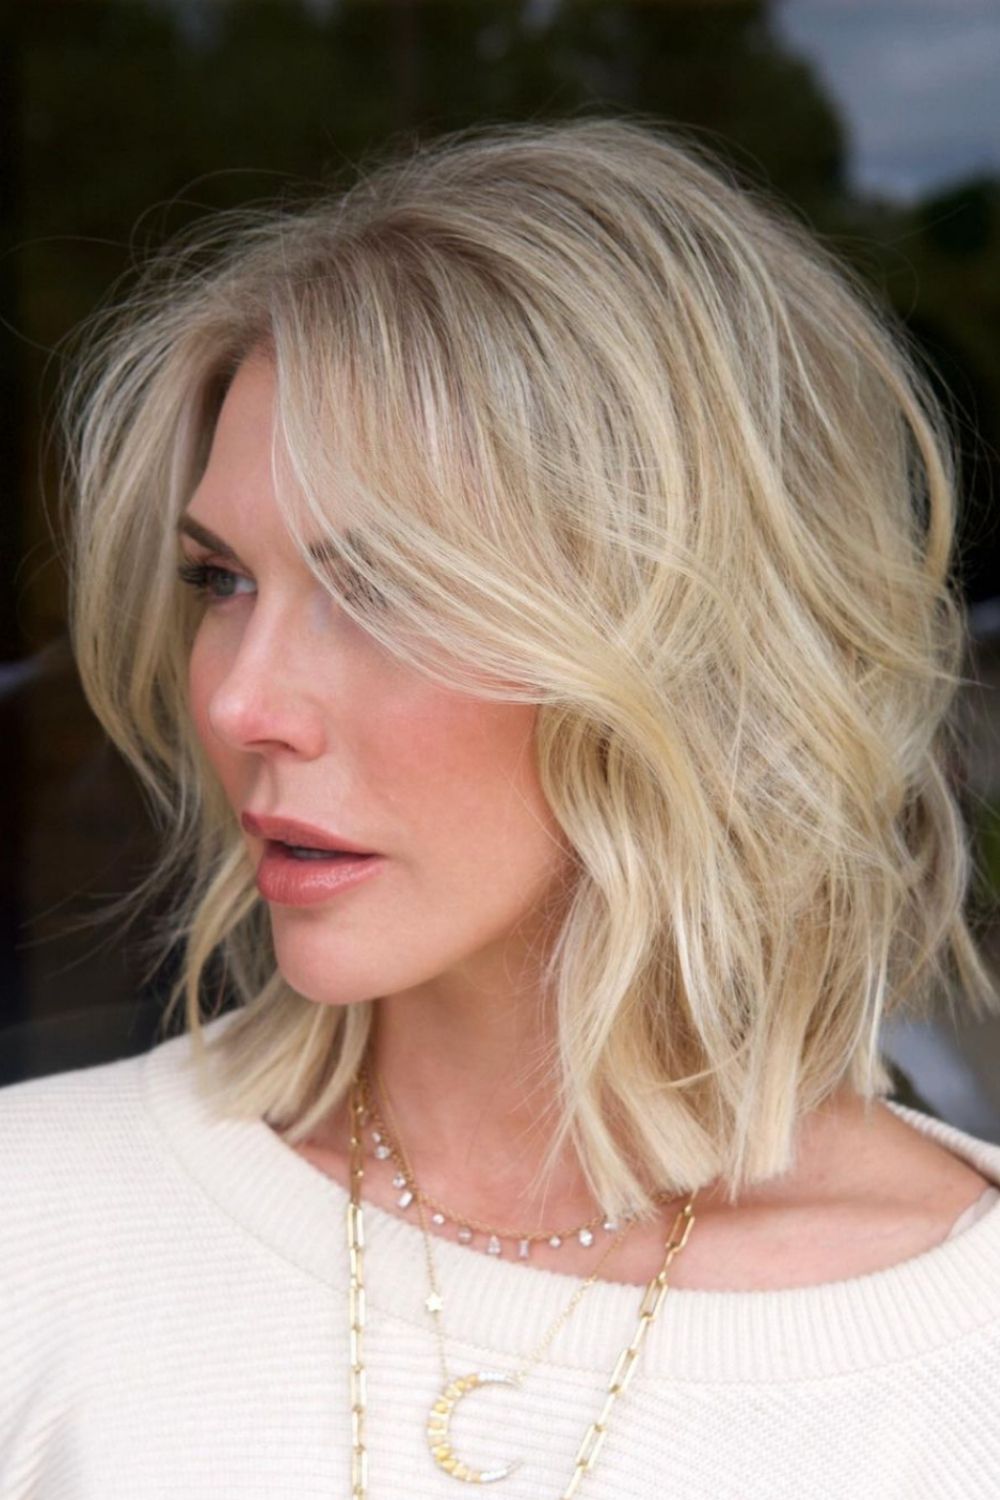 Short blonde hairstyle for fine hair 2